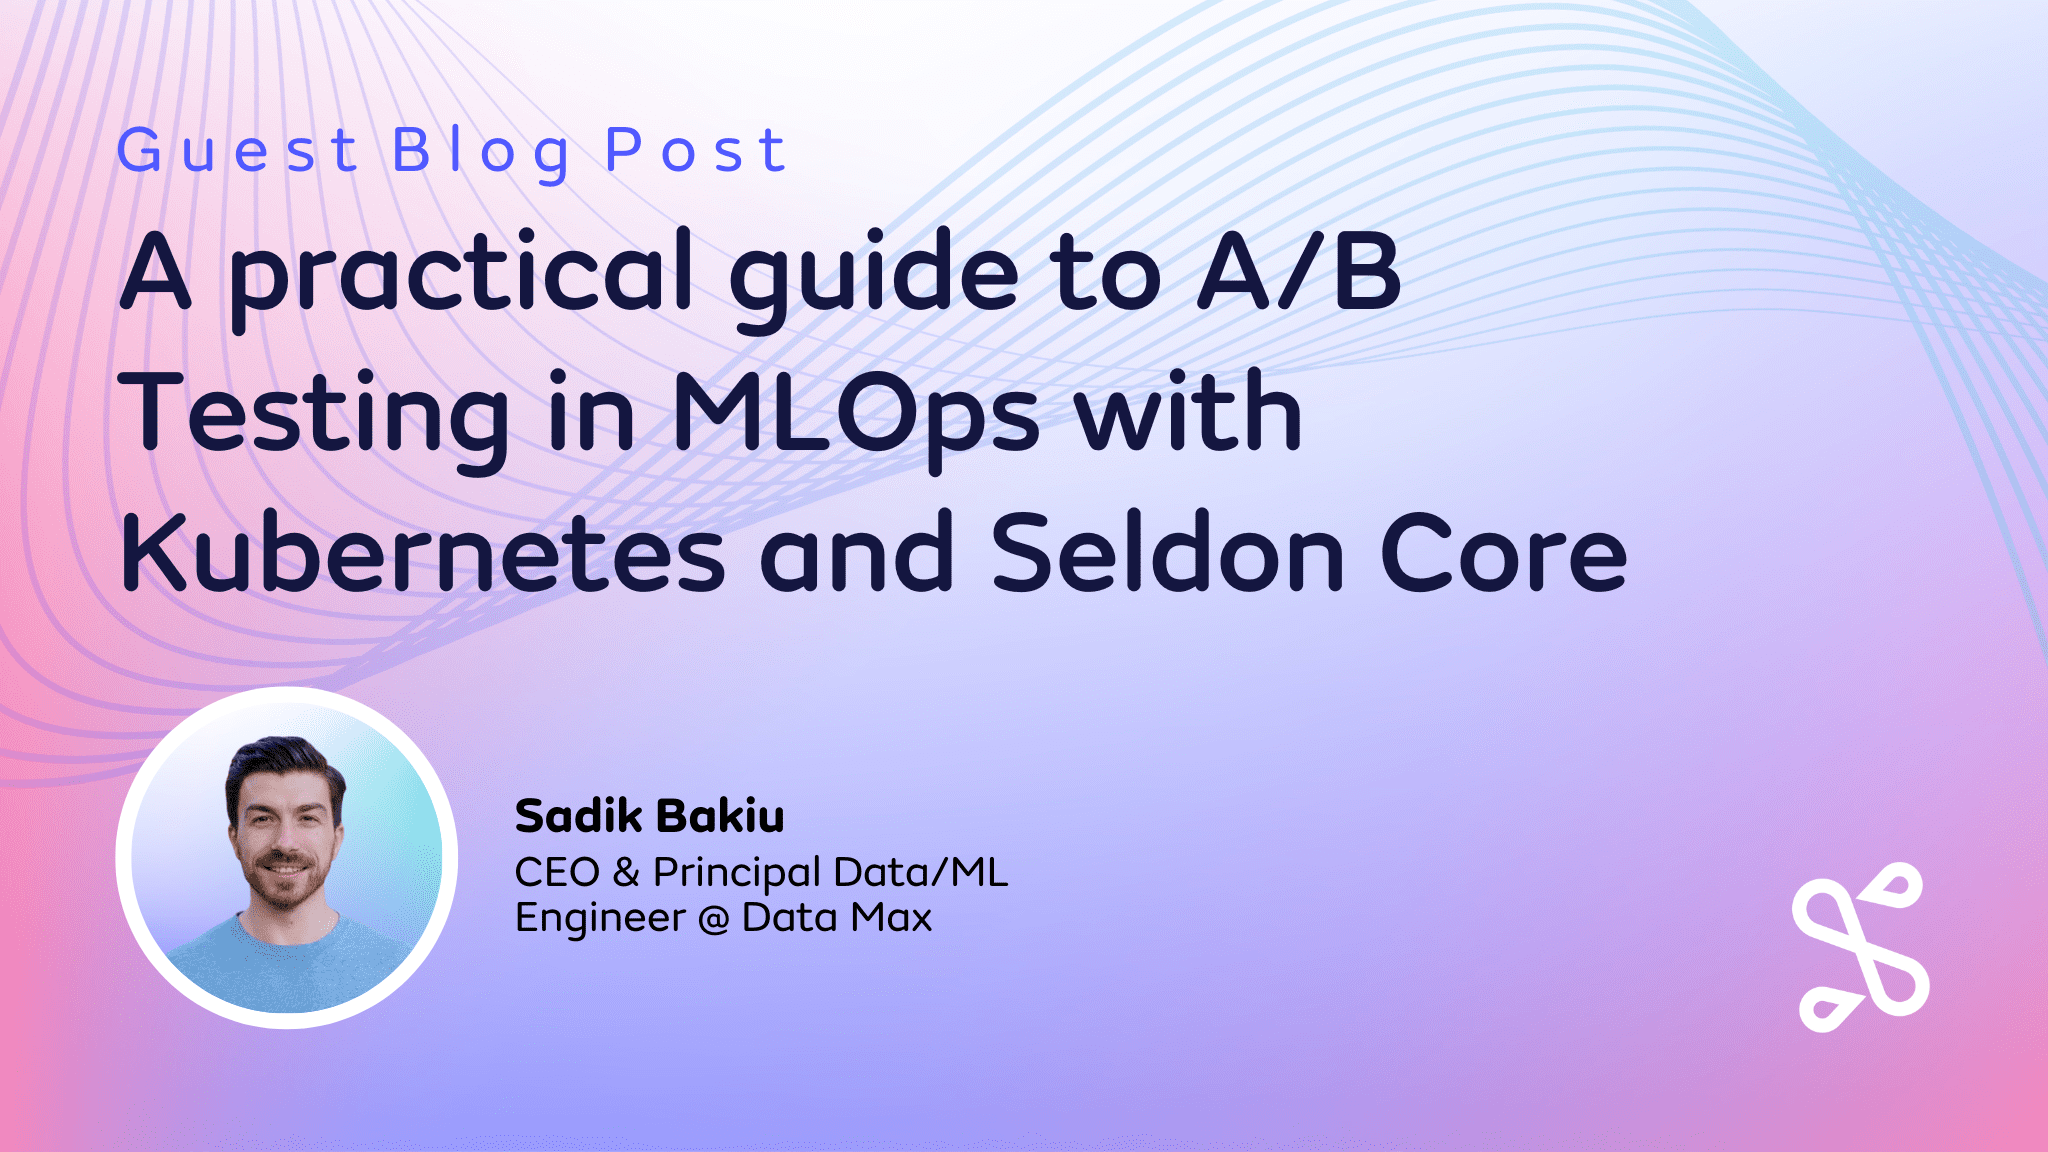 A practical guide to A/B Testing in MLOps with Kubernetes and Seldon Core